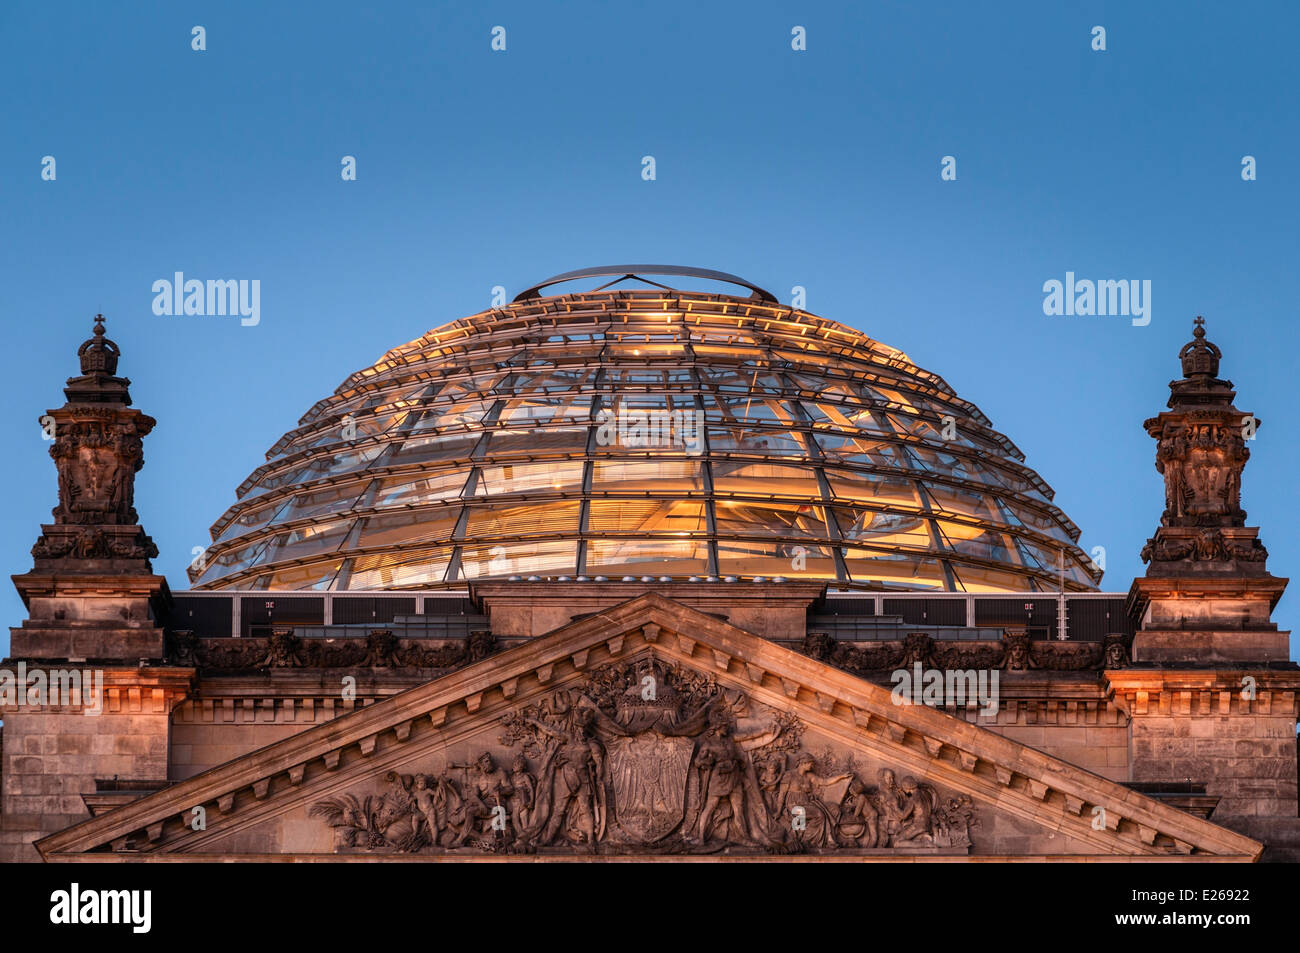 Reichstag building and dome Berlin Germany Stock Photo